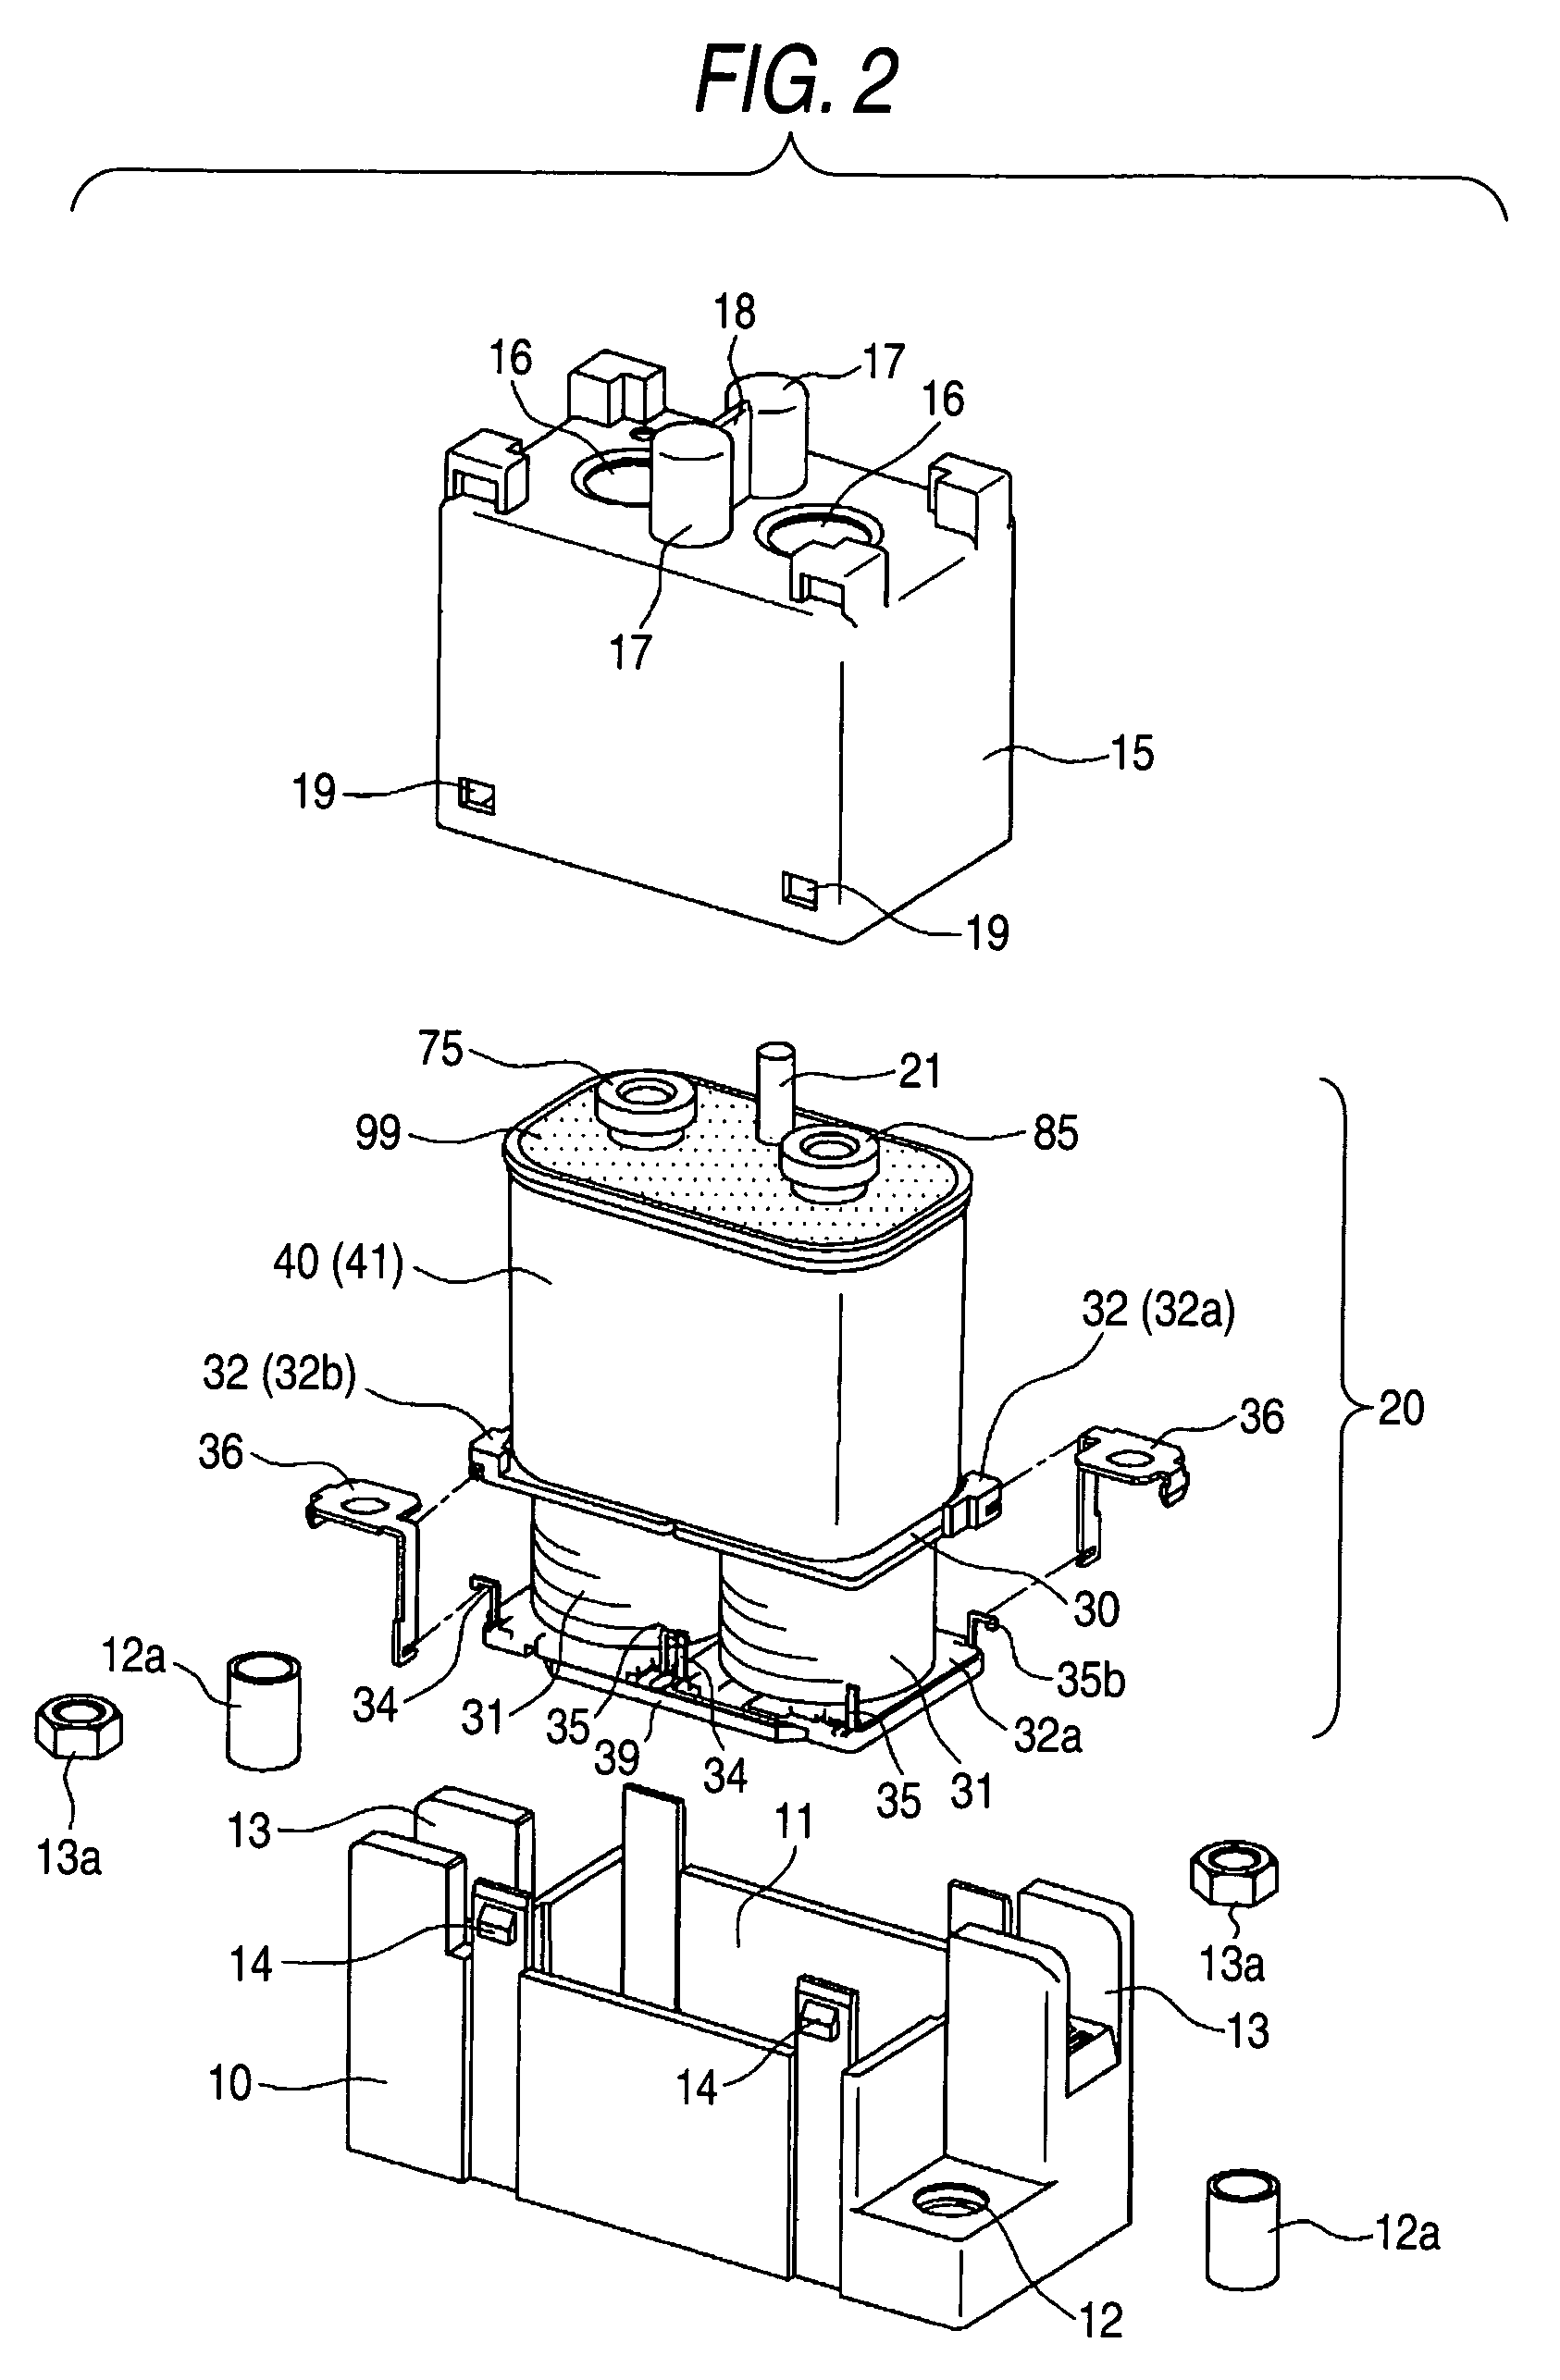 Supporting structure of fixed contact terminals